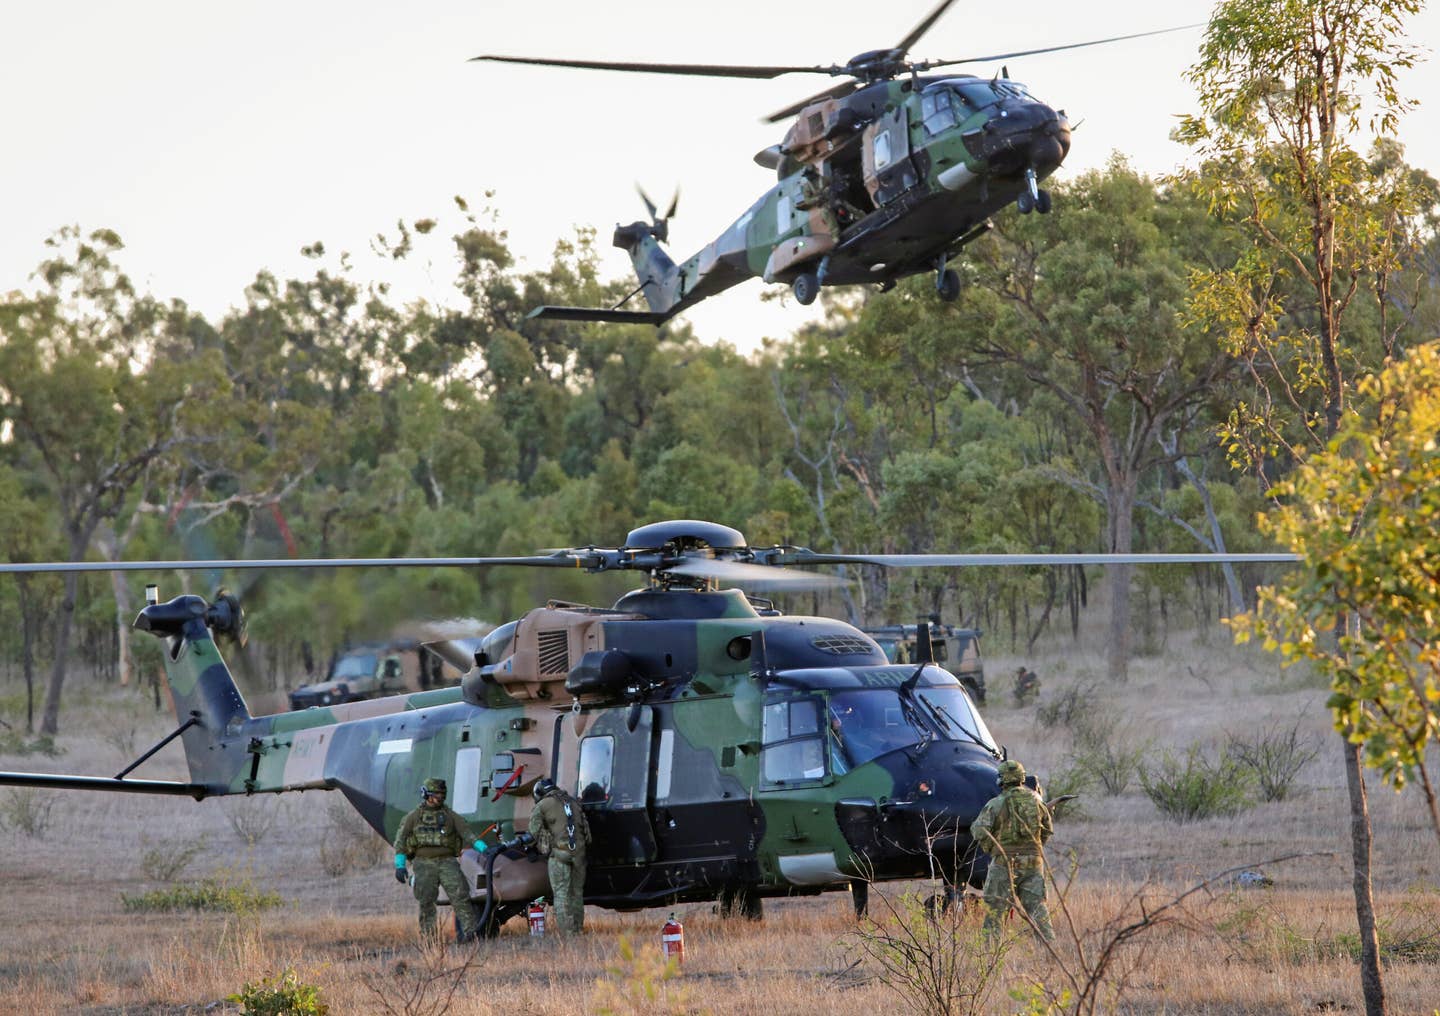 An Australian Army MRH90 Taipan helicopter from the 5th Aviation Regiment takes off for a sortie during Vigilant Scimitar, Townsville Field Training Area, in November 2020. <em>COMMONWEALTH OF AUSTRALIA, DEPARTMENT OF DEFENSE</em>